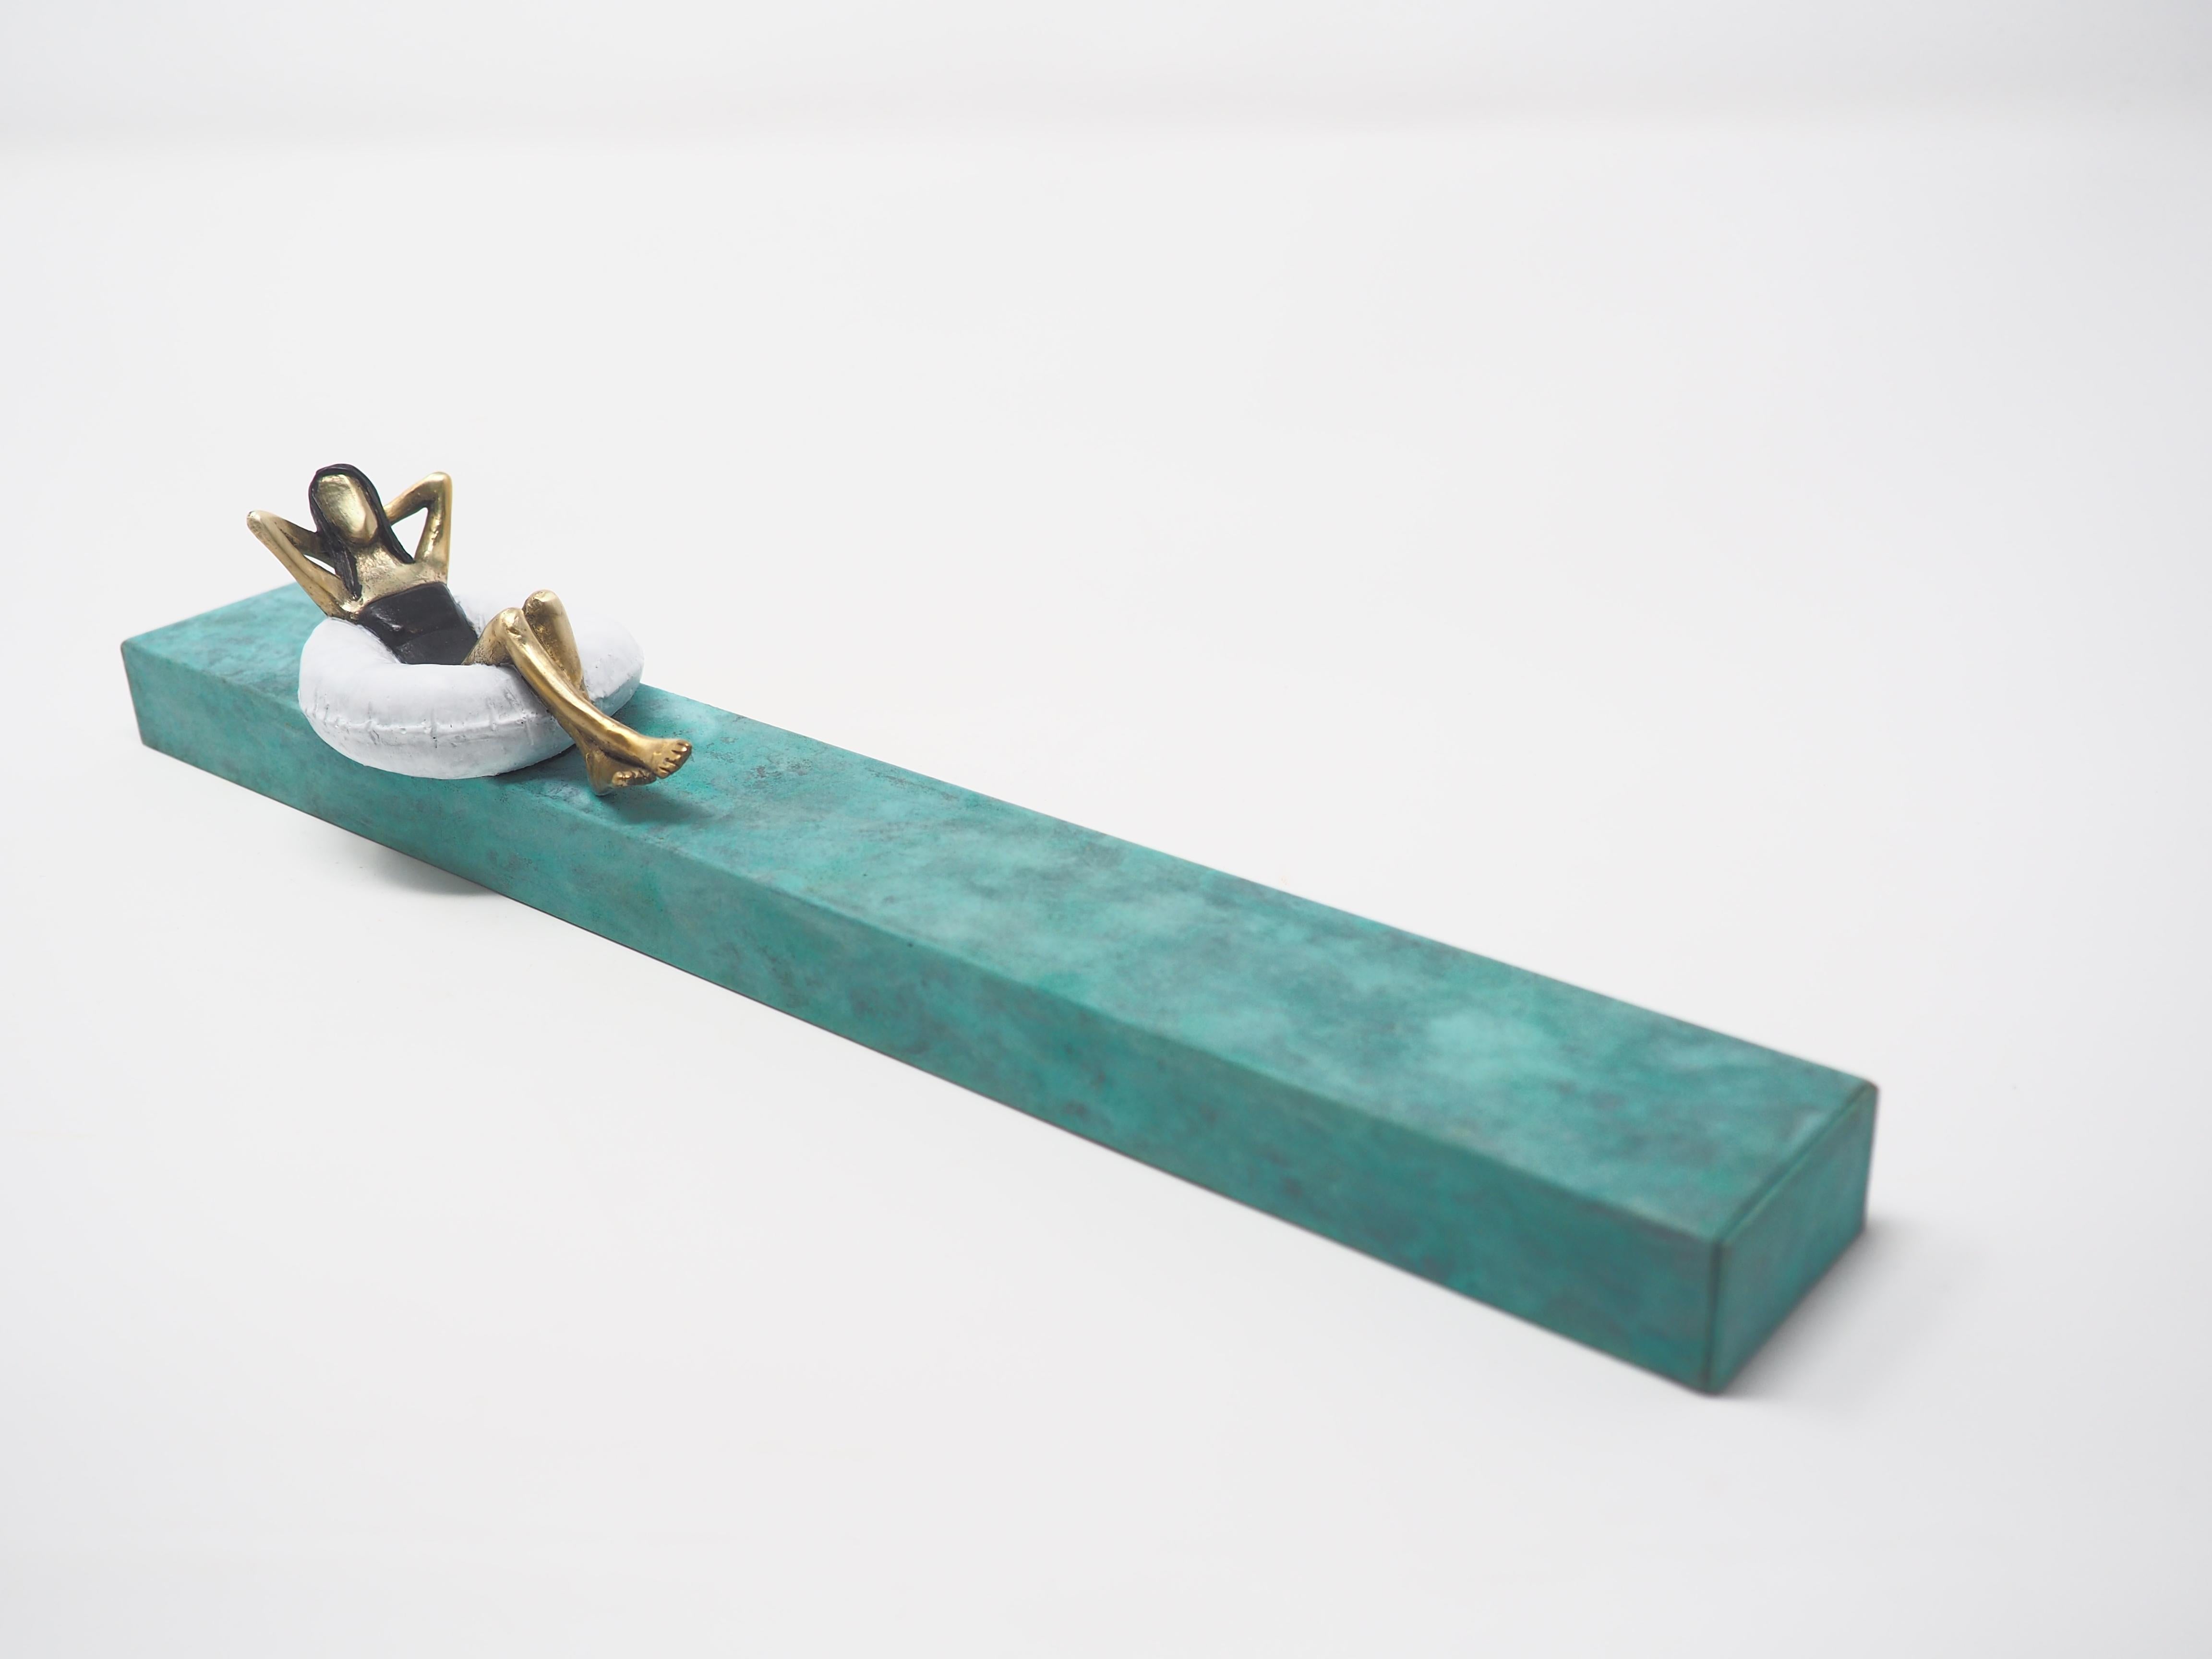 Rock the boat- bronze and iron small figurative mural sculpture with lying woman - Contemporary Sculpture by Mireia Serra